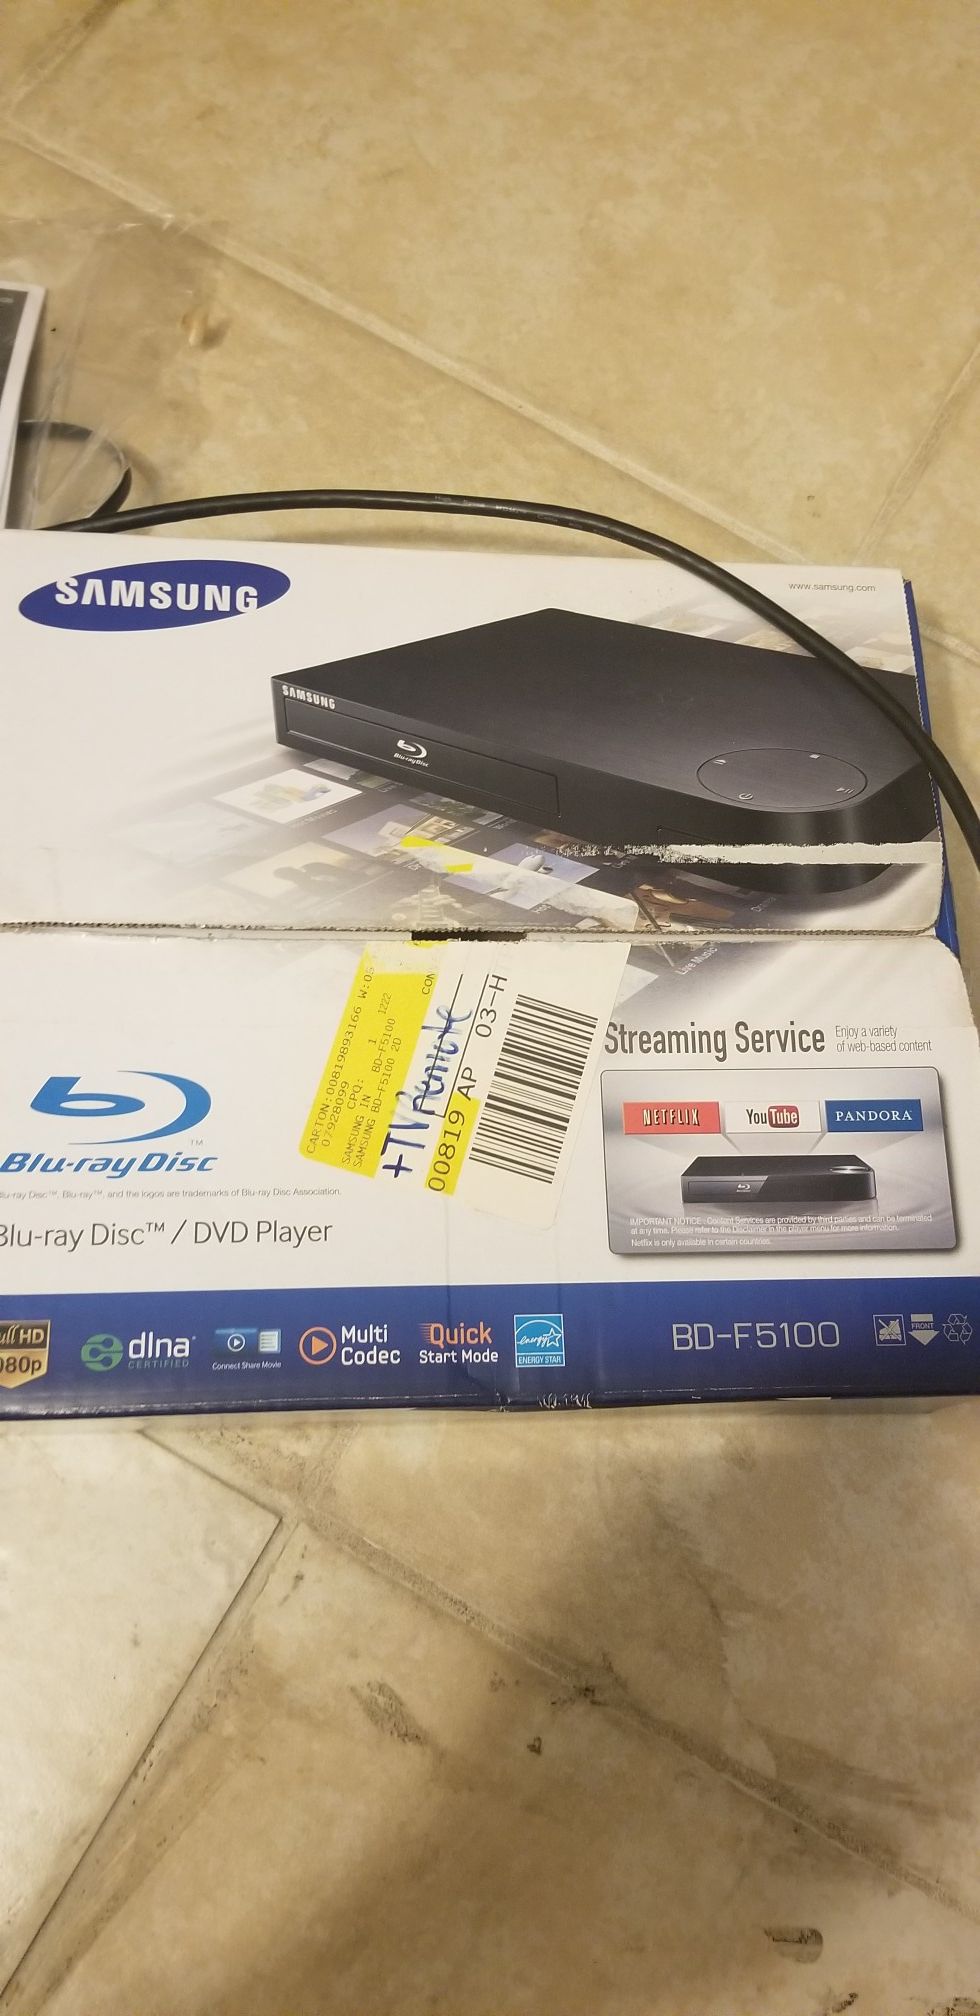 Samsung Blu-ray DVD player with streaming services